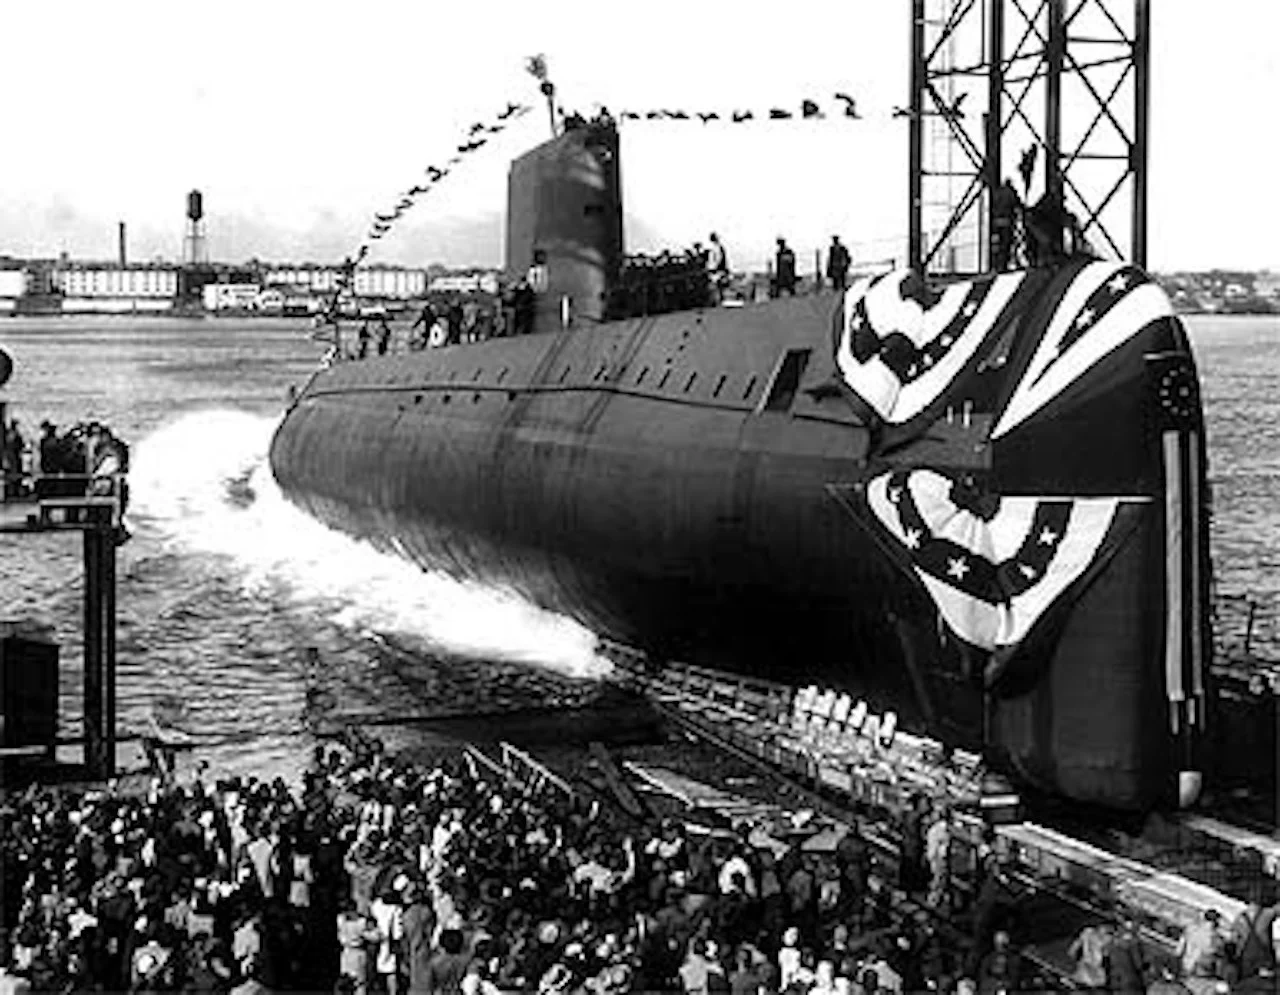 September 30, 1954 - World’s First Nuclear Submarine